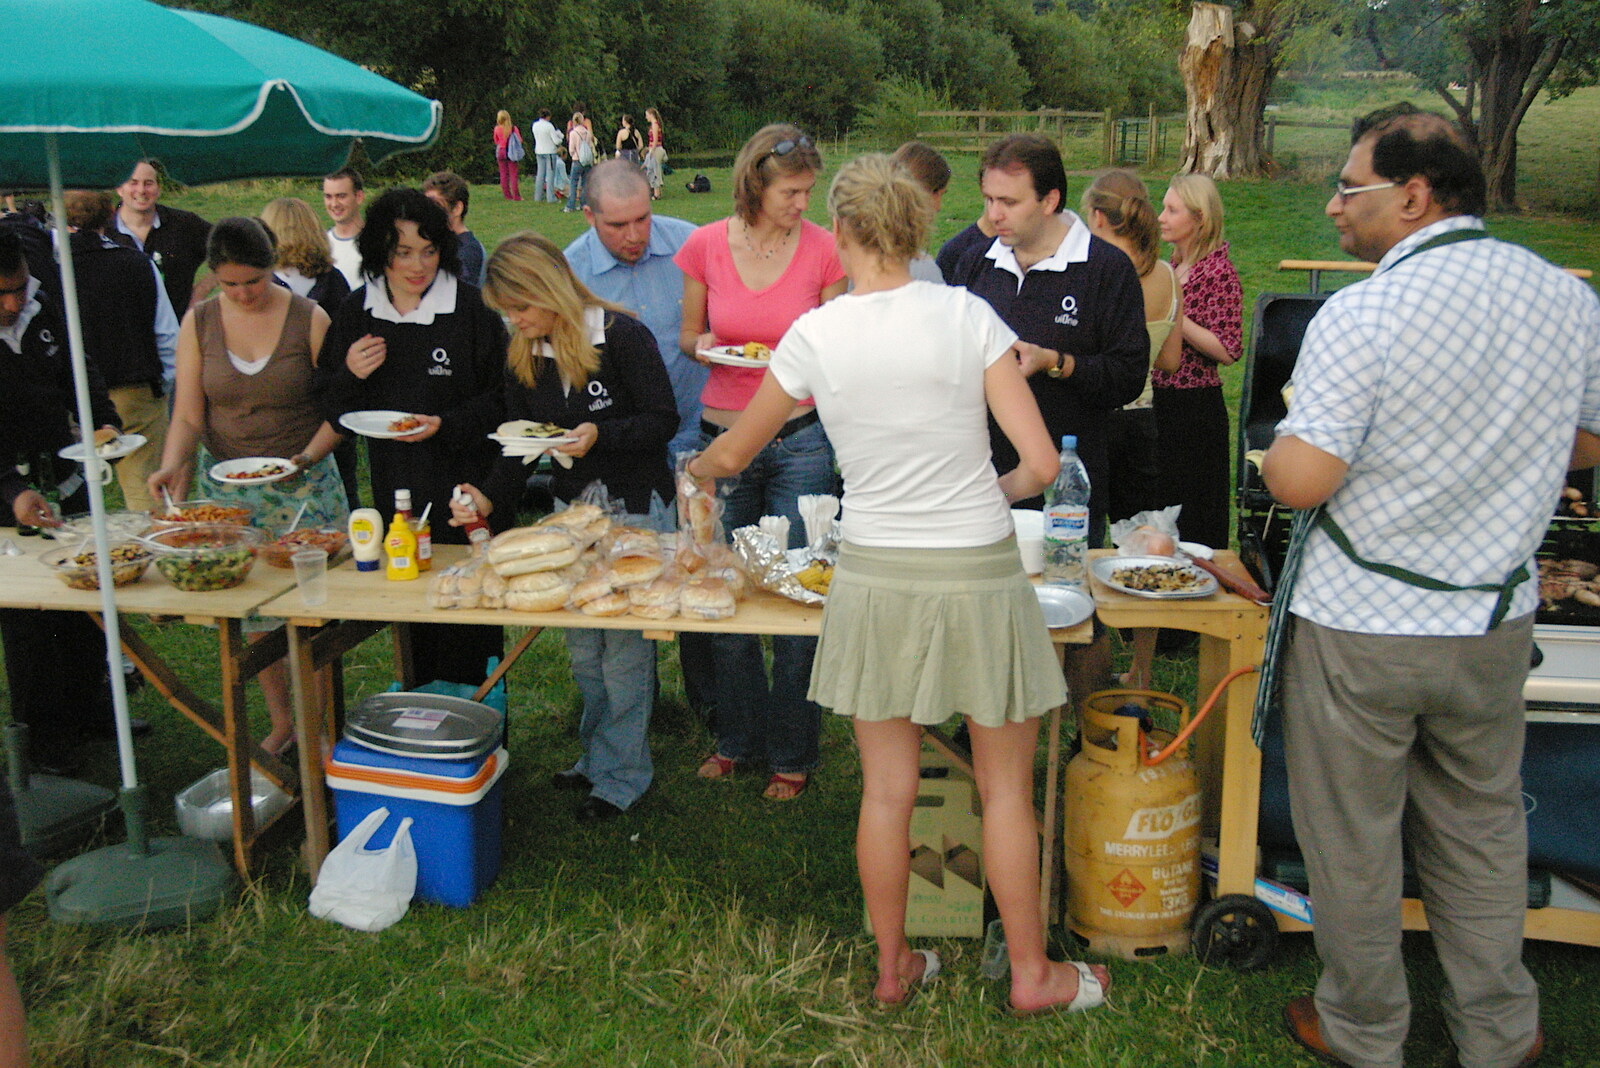 Food is served from Qualcomm goes Punting on the Cam, Grantchester Meadows, Cambridge - 18th August 2005